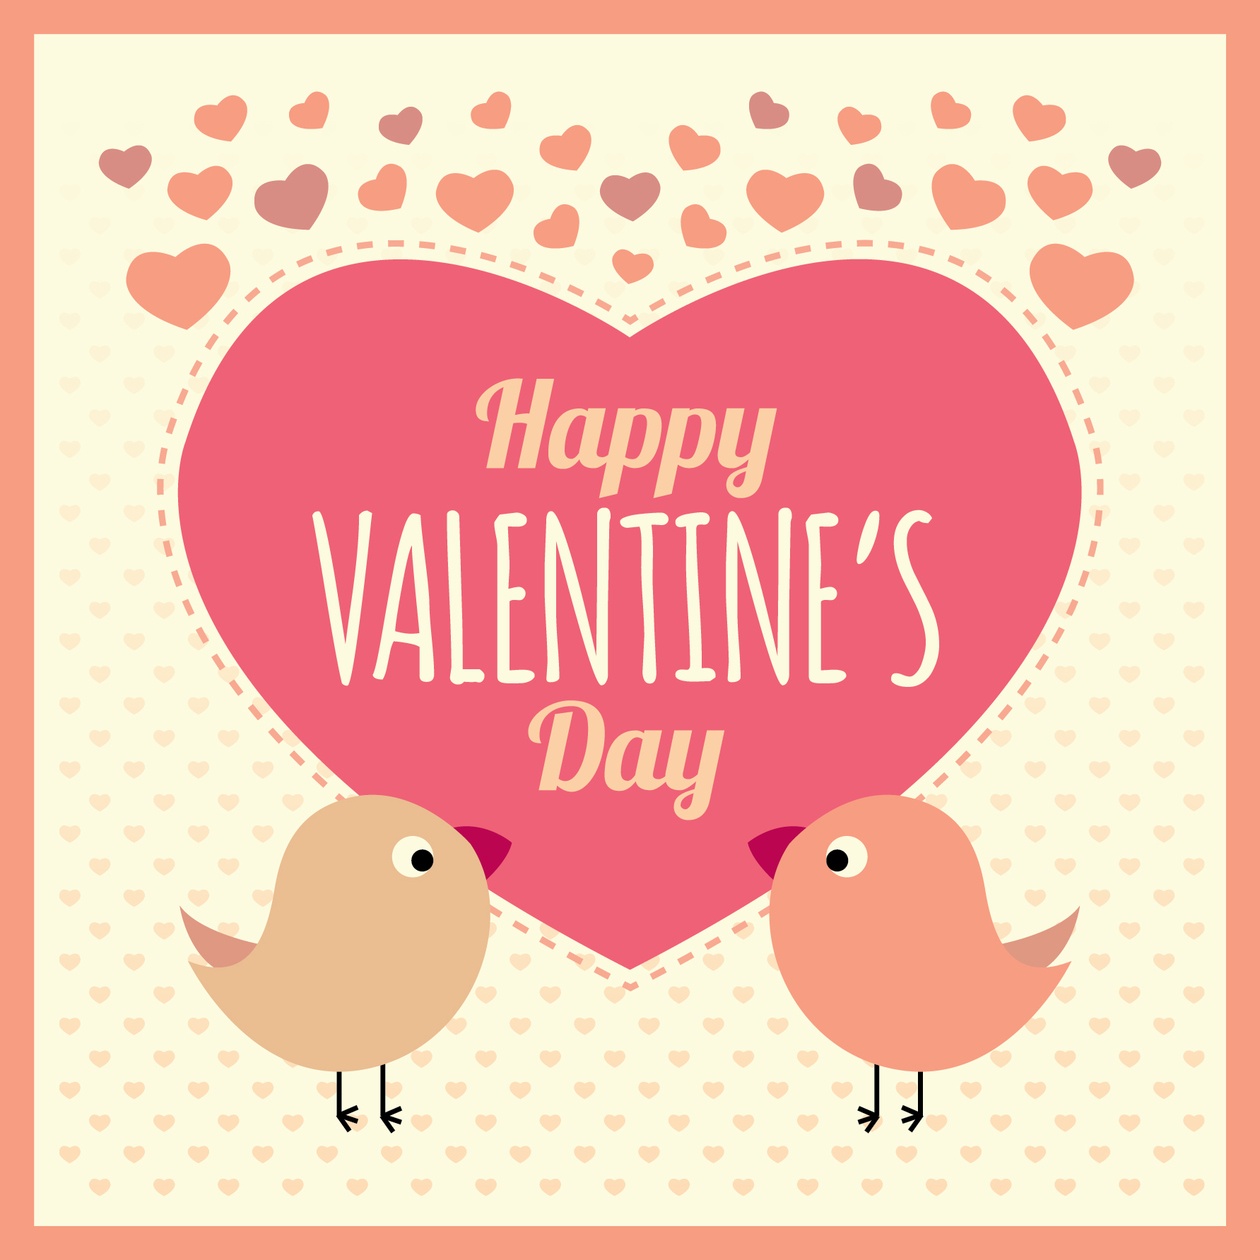 Valentines Card Background with Birds and Text Photoshop brush